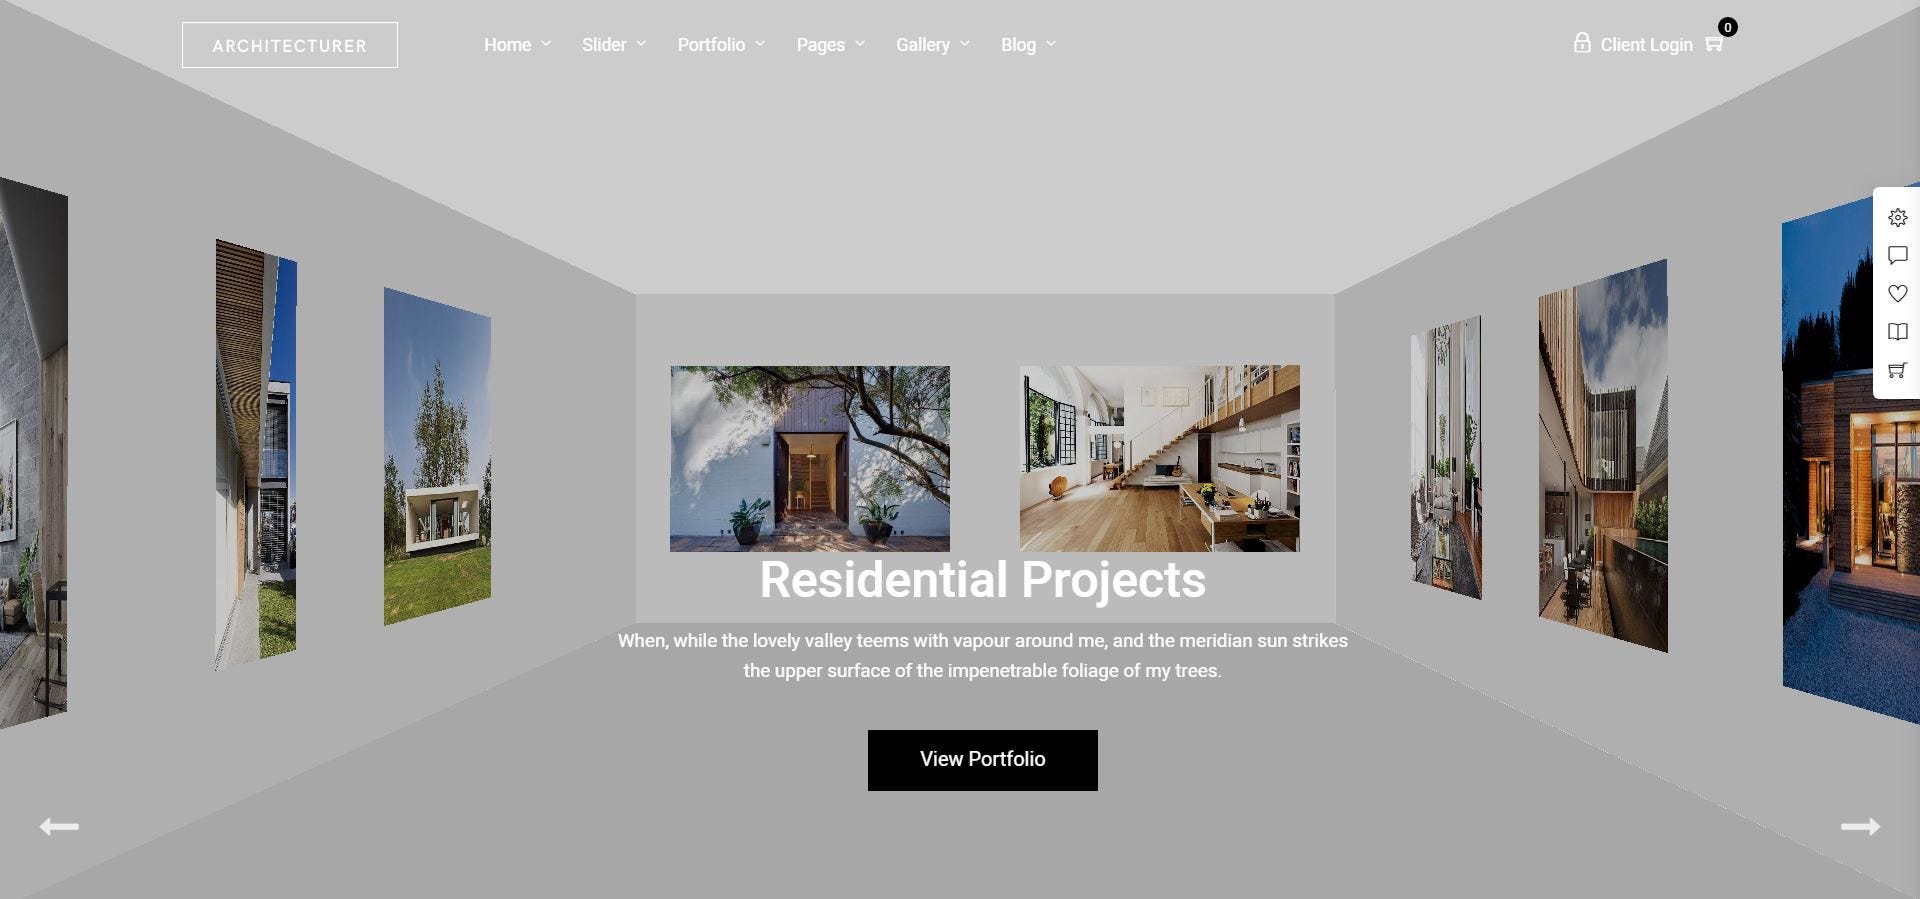 10 Most Stylish Wordpress Templates For Architecture Blogs